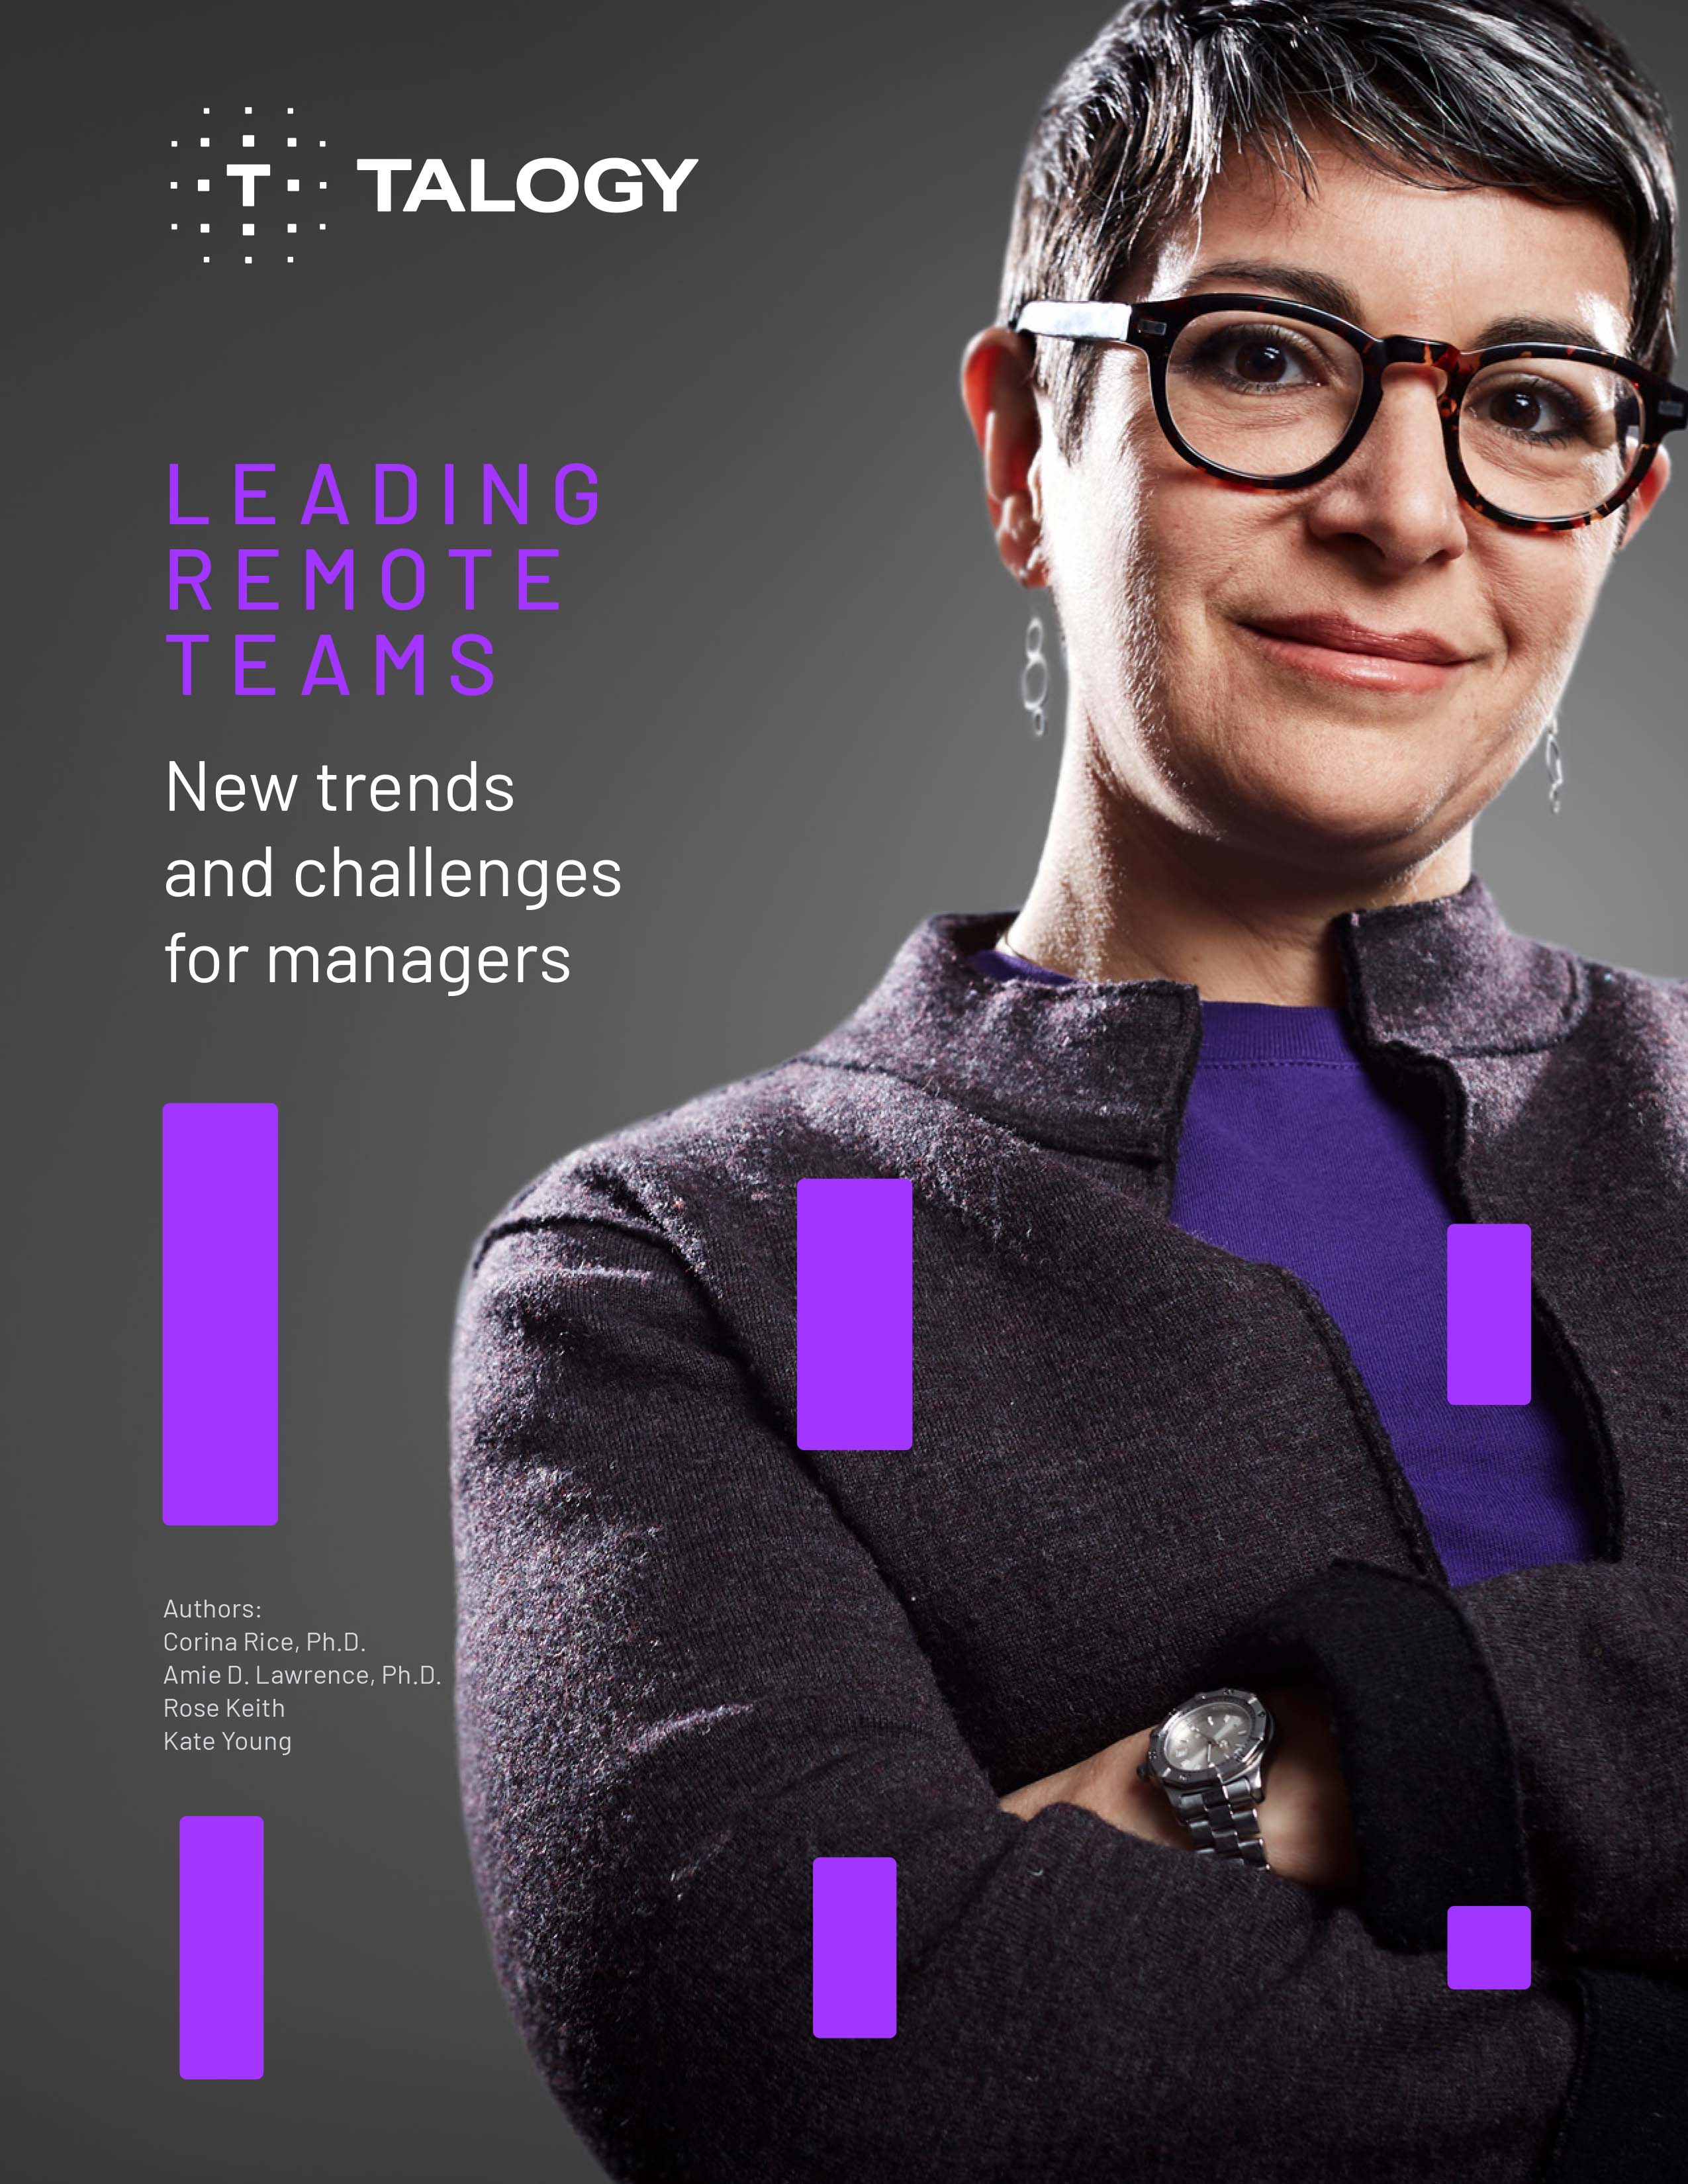 Leading remote teams whitepaper cover